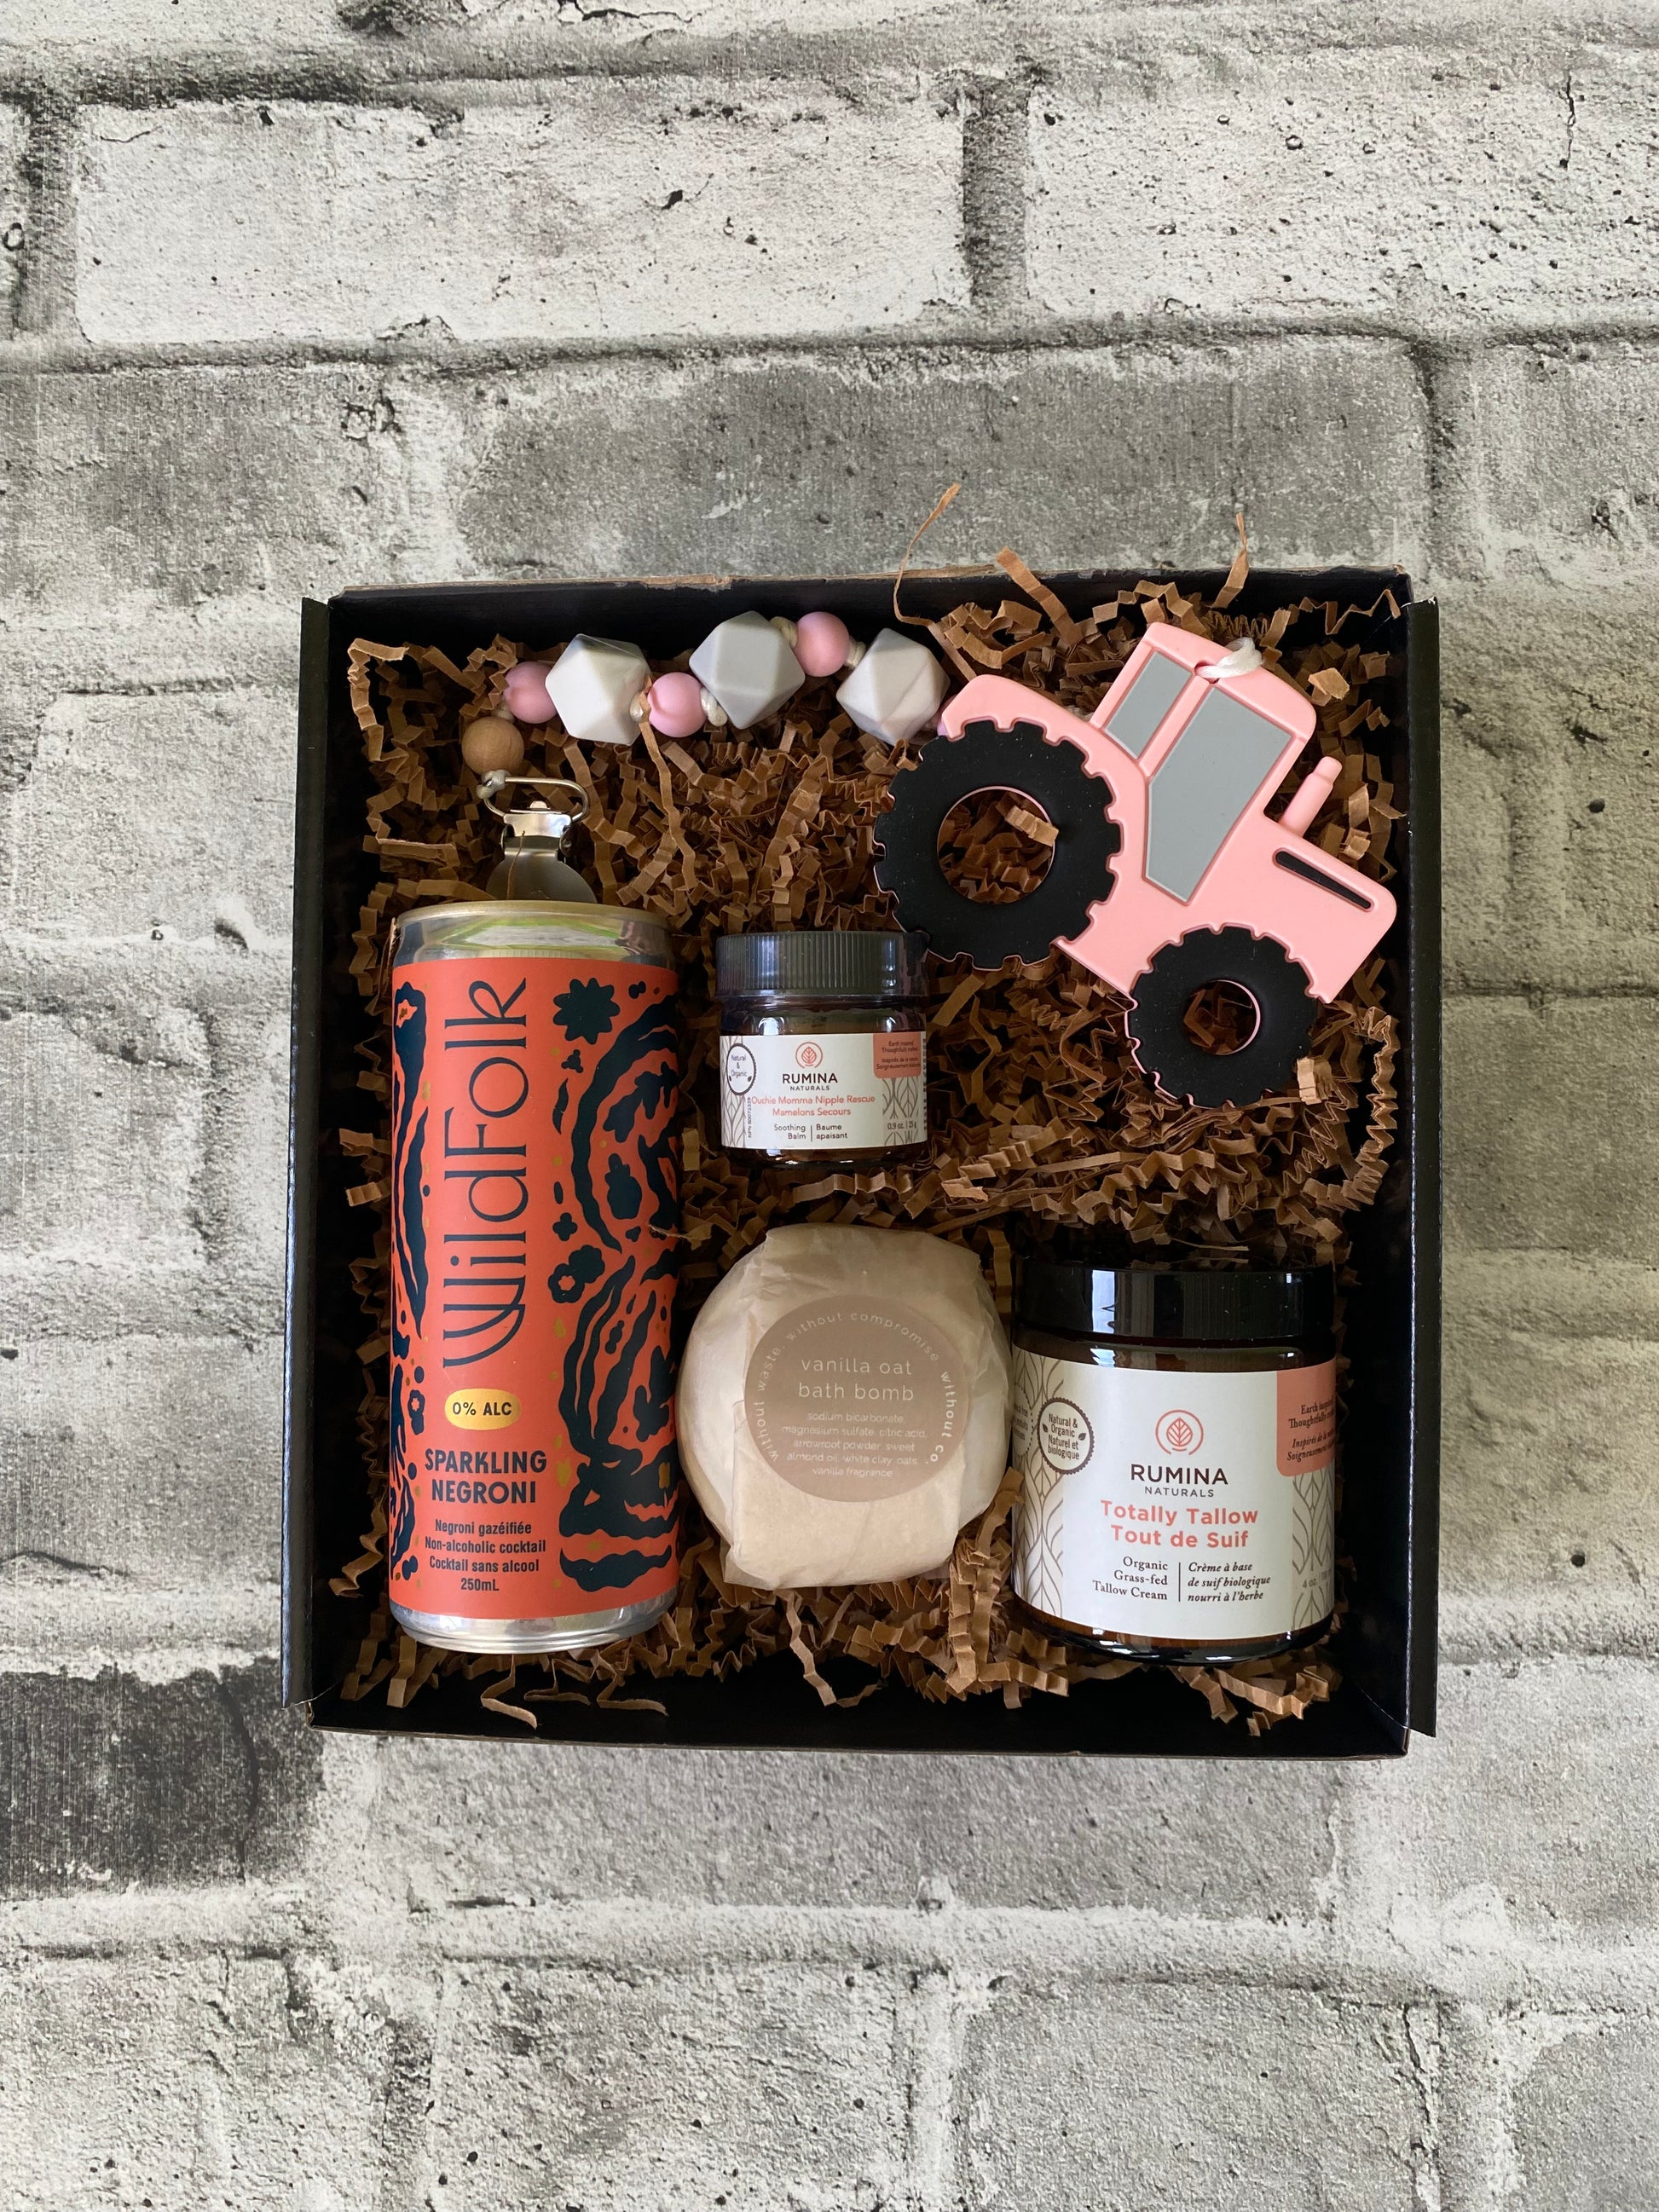 Our gift baskets contain all local product from other independent businesses and we delivery to Cochrane, Calgary, Canmore and everywhere in between. Canada wide shipping also available.